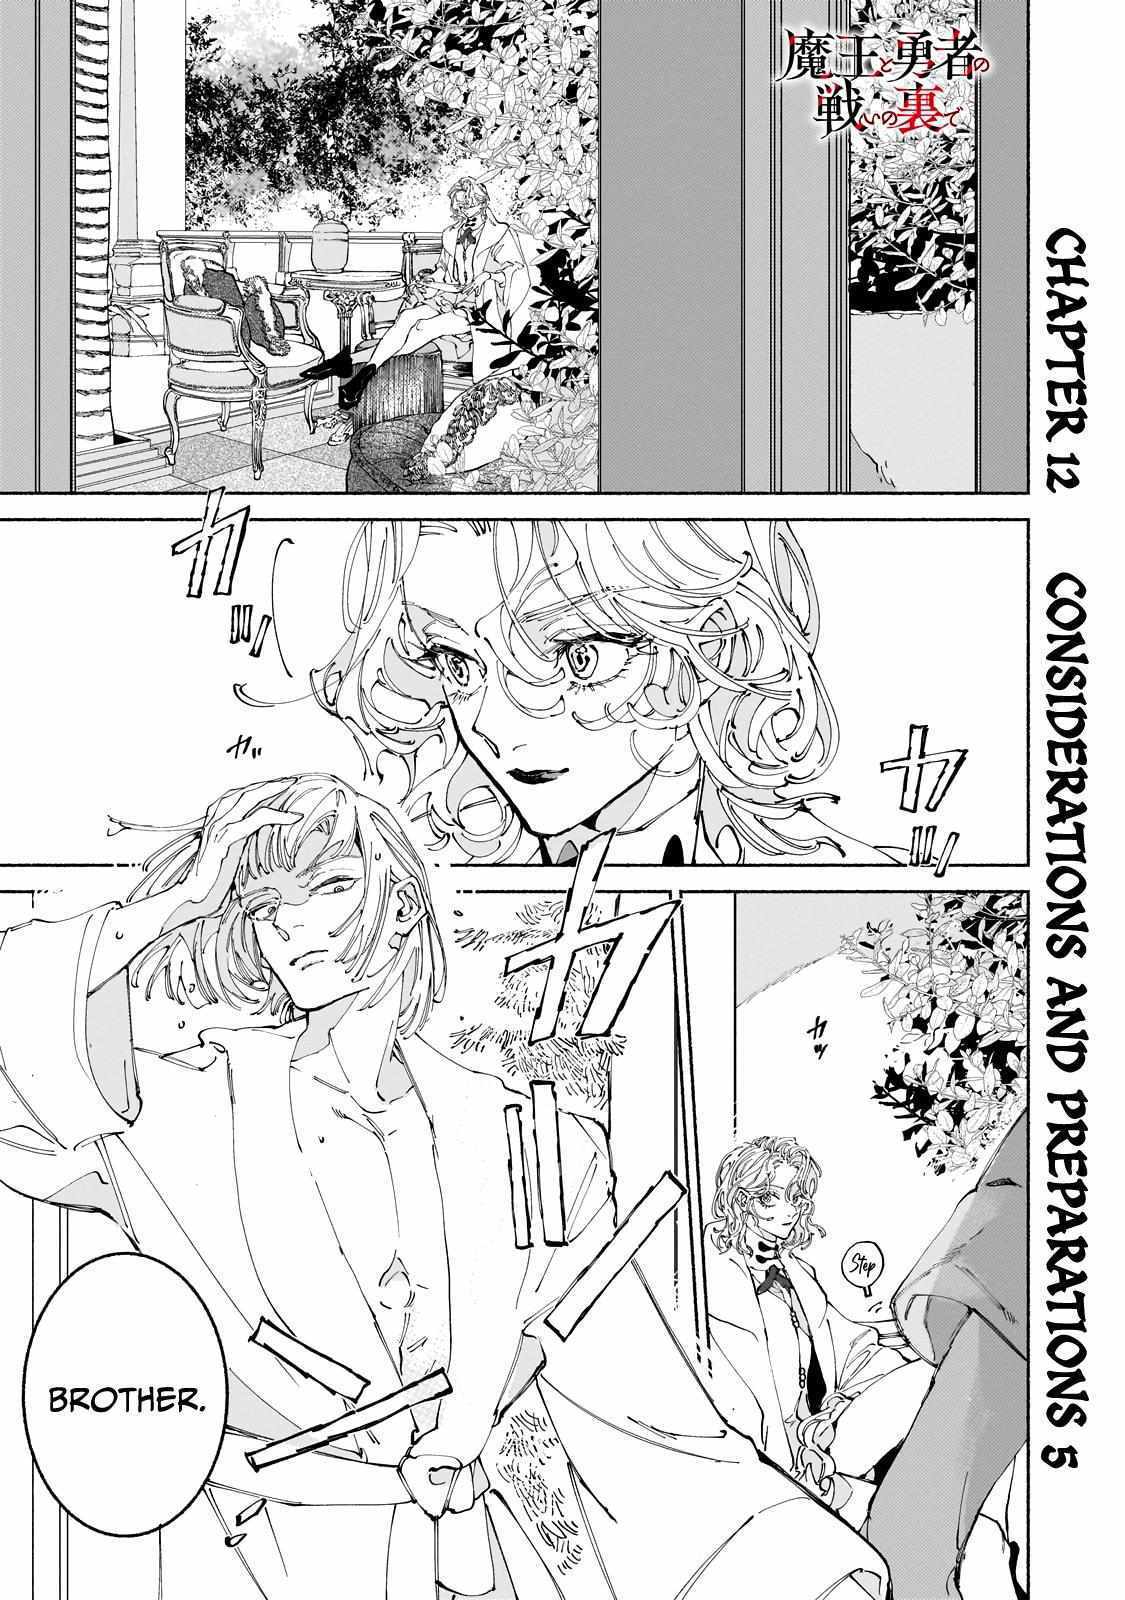 Behind The Battle Of The Hero And The Demon King - Page 2